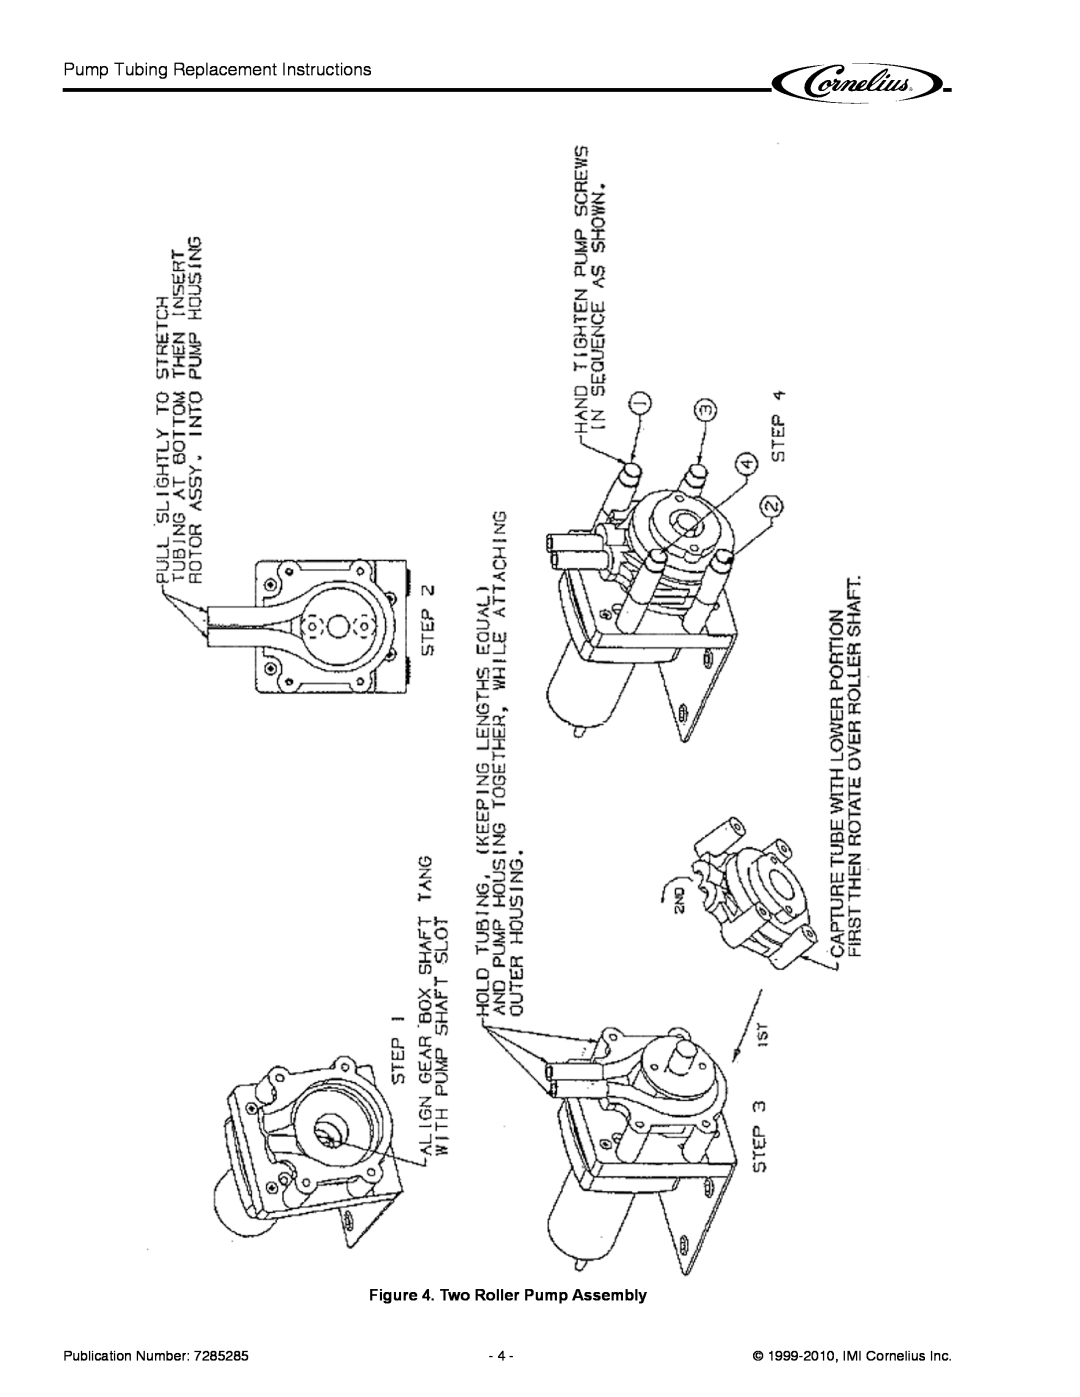 Cornelius 45098 Pump Tubing Replacement Instructions, Two Roller Pump Assembly, Publication Number 